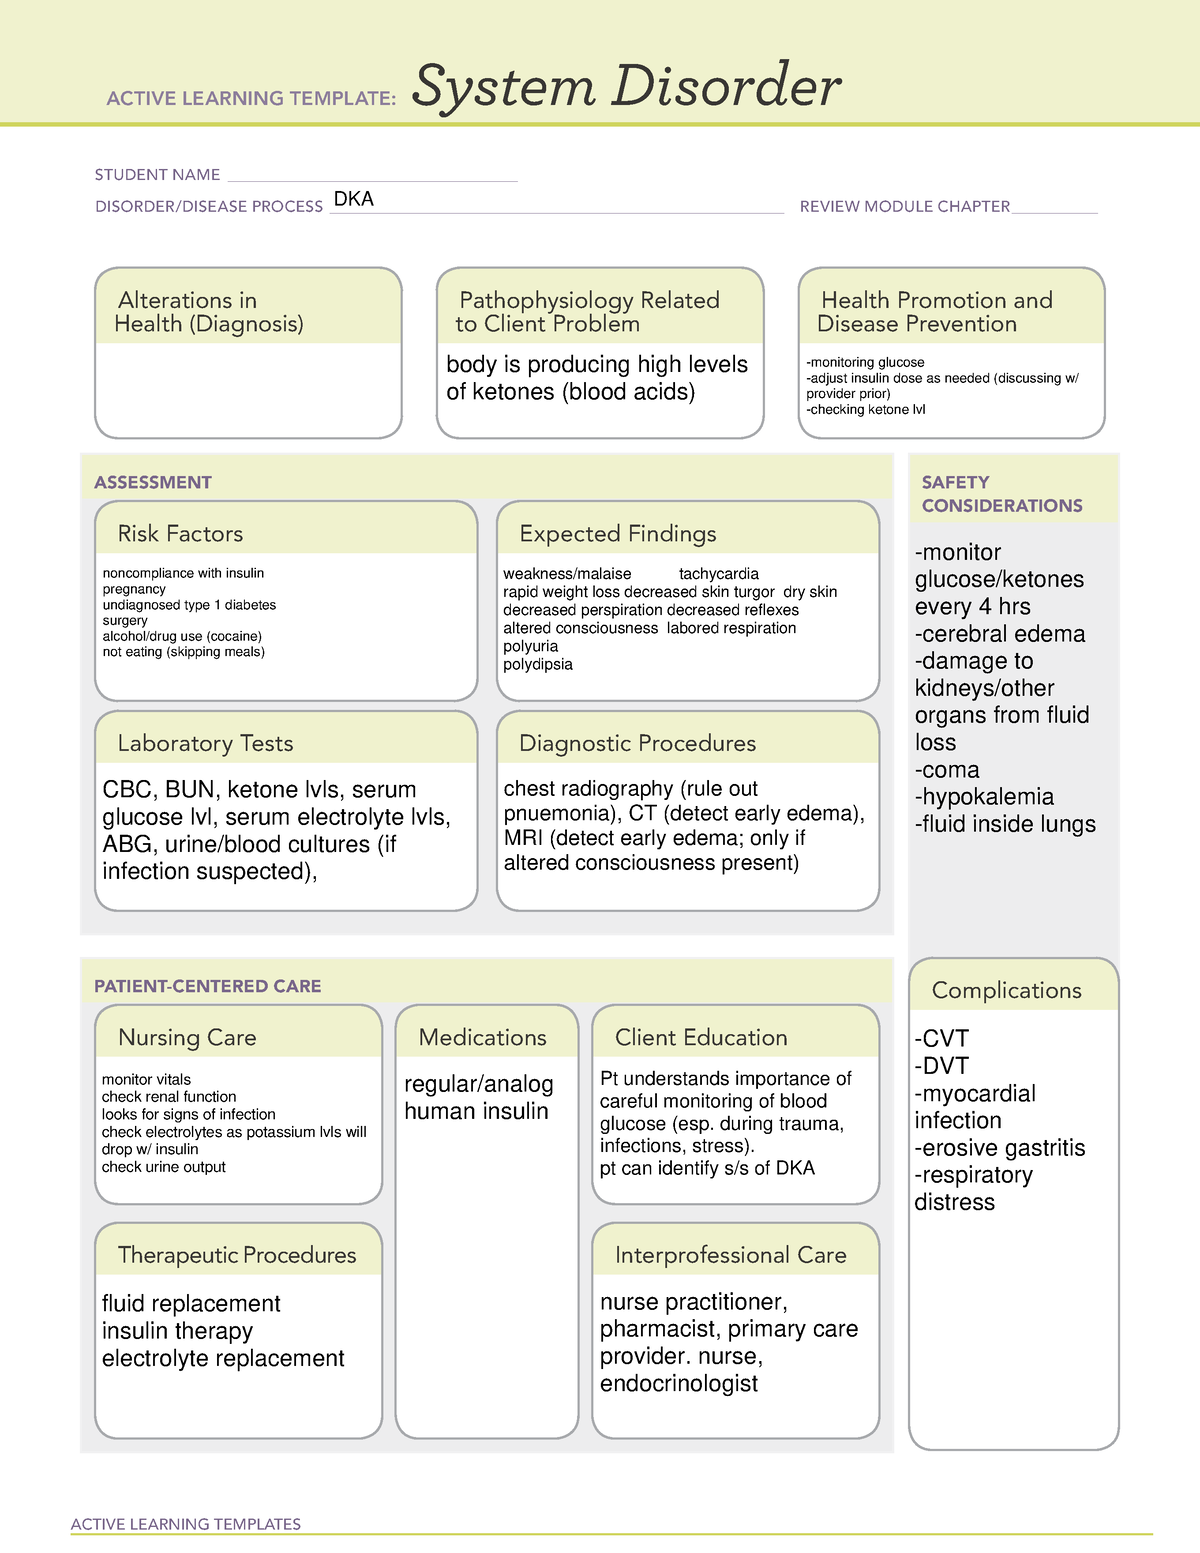 DKA System Disorder ATI Template ACTIVE LEARNING TEMPLATES System